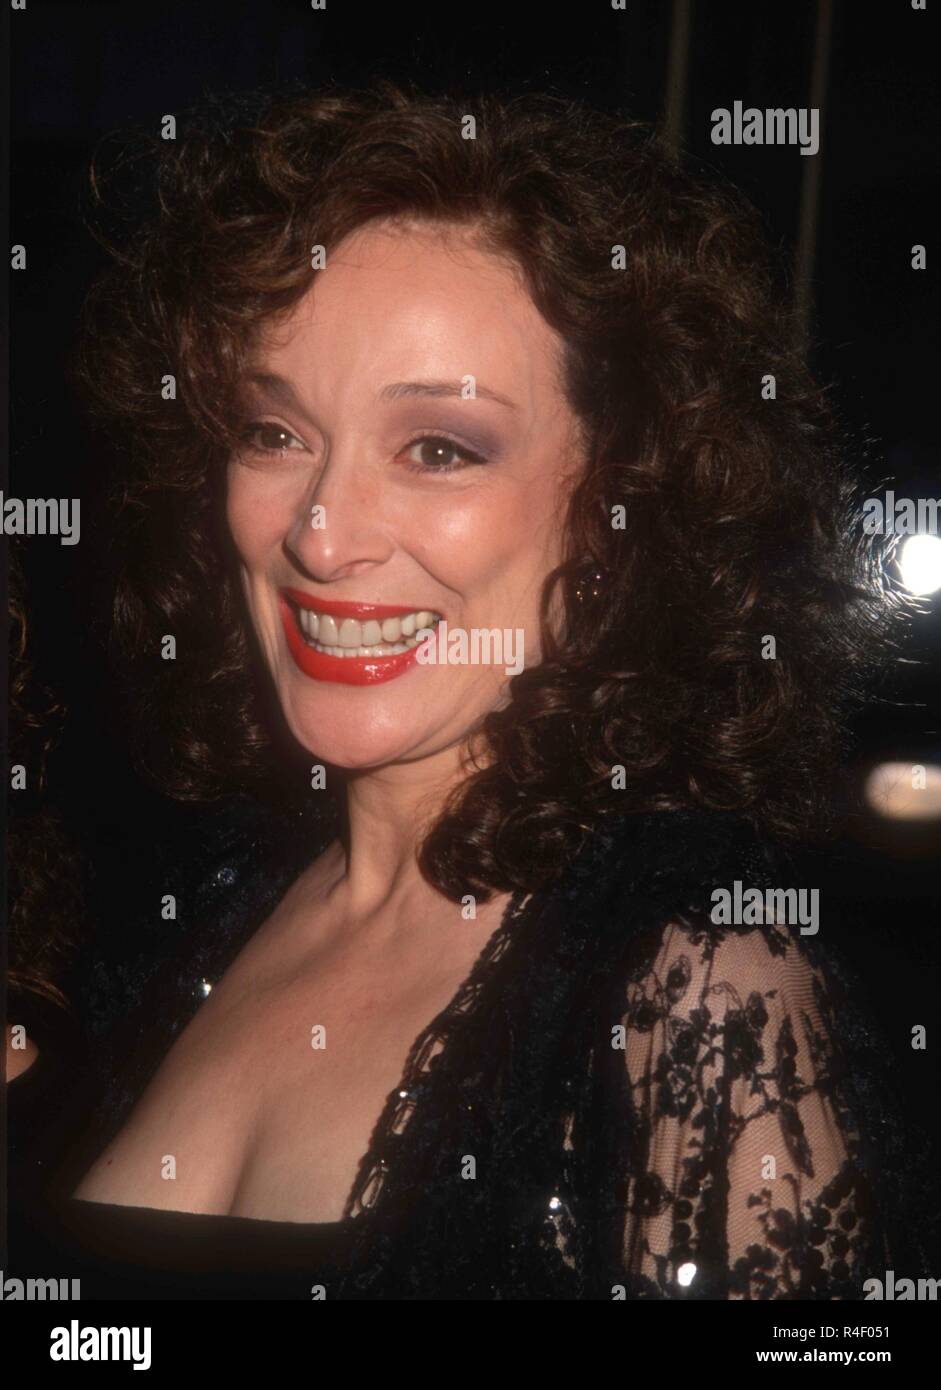 BEVERLY HILLS, CA - FEBRUARY 26: Actress Dixie Carter attends the Ninth Annual Soap Opera Digest Awards on February 26, 1993 at the Beverly Hilton Hotel in Beverly Hills, California. Photo by Barry King/Alamy Stock Photo Stock Photo